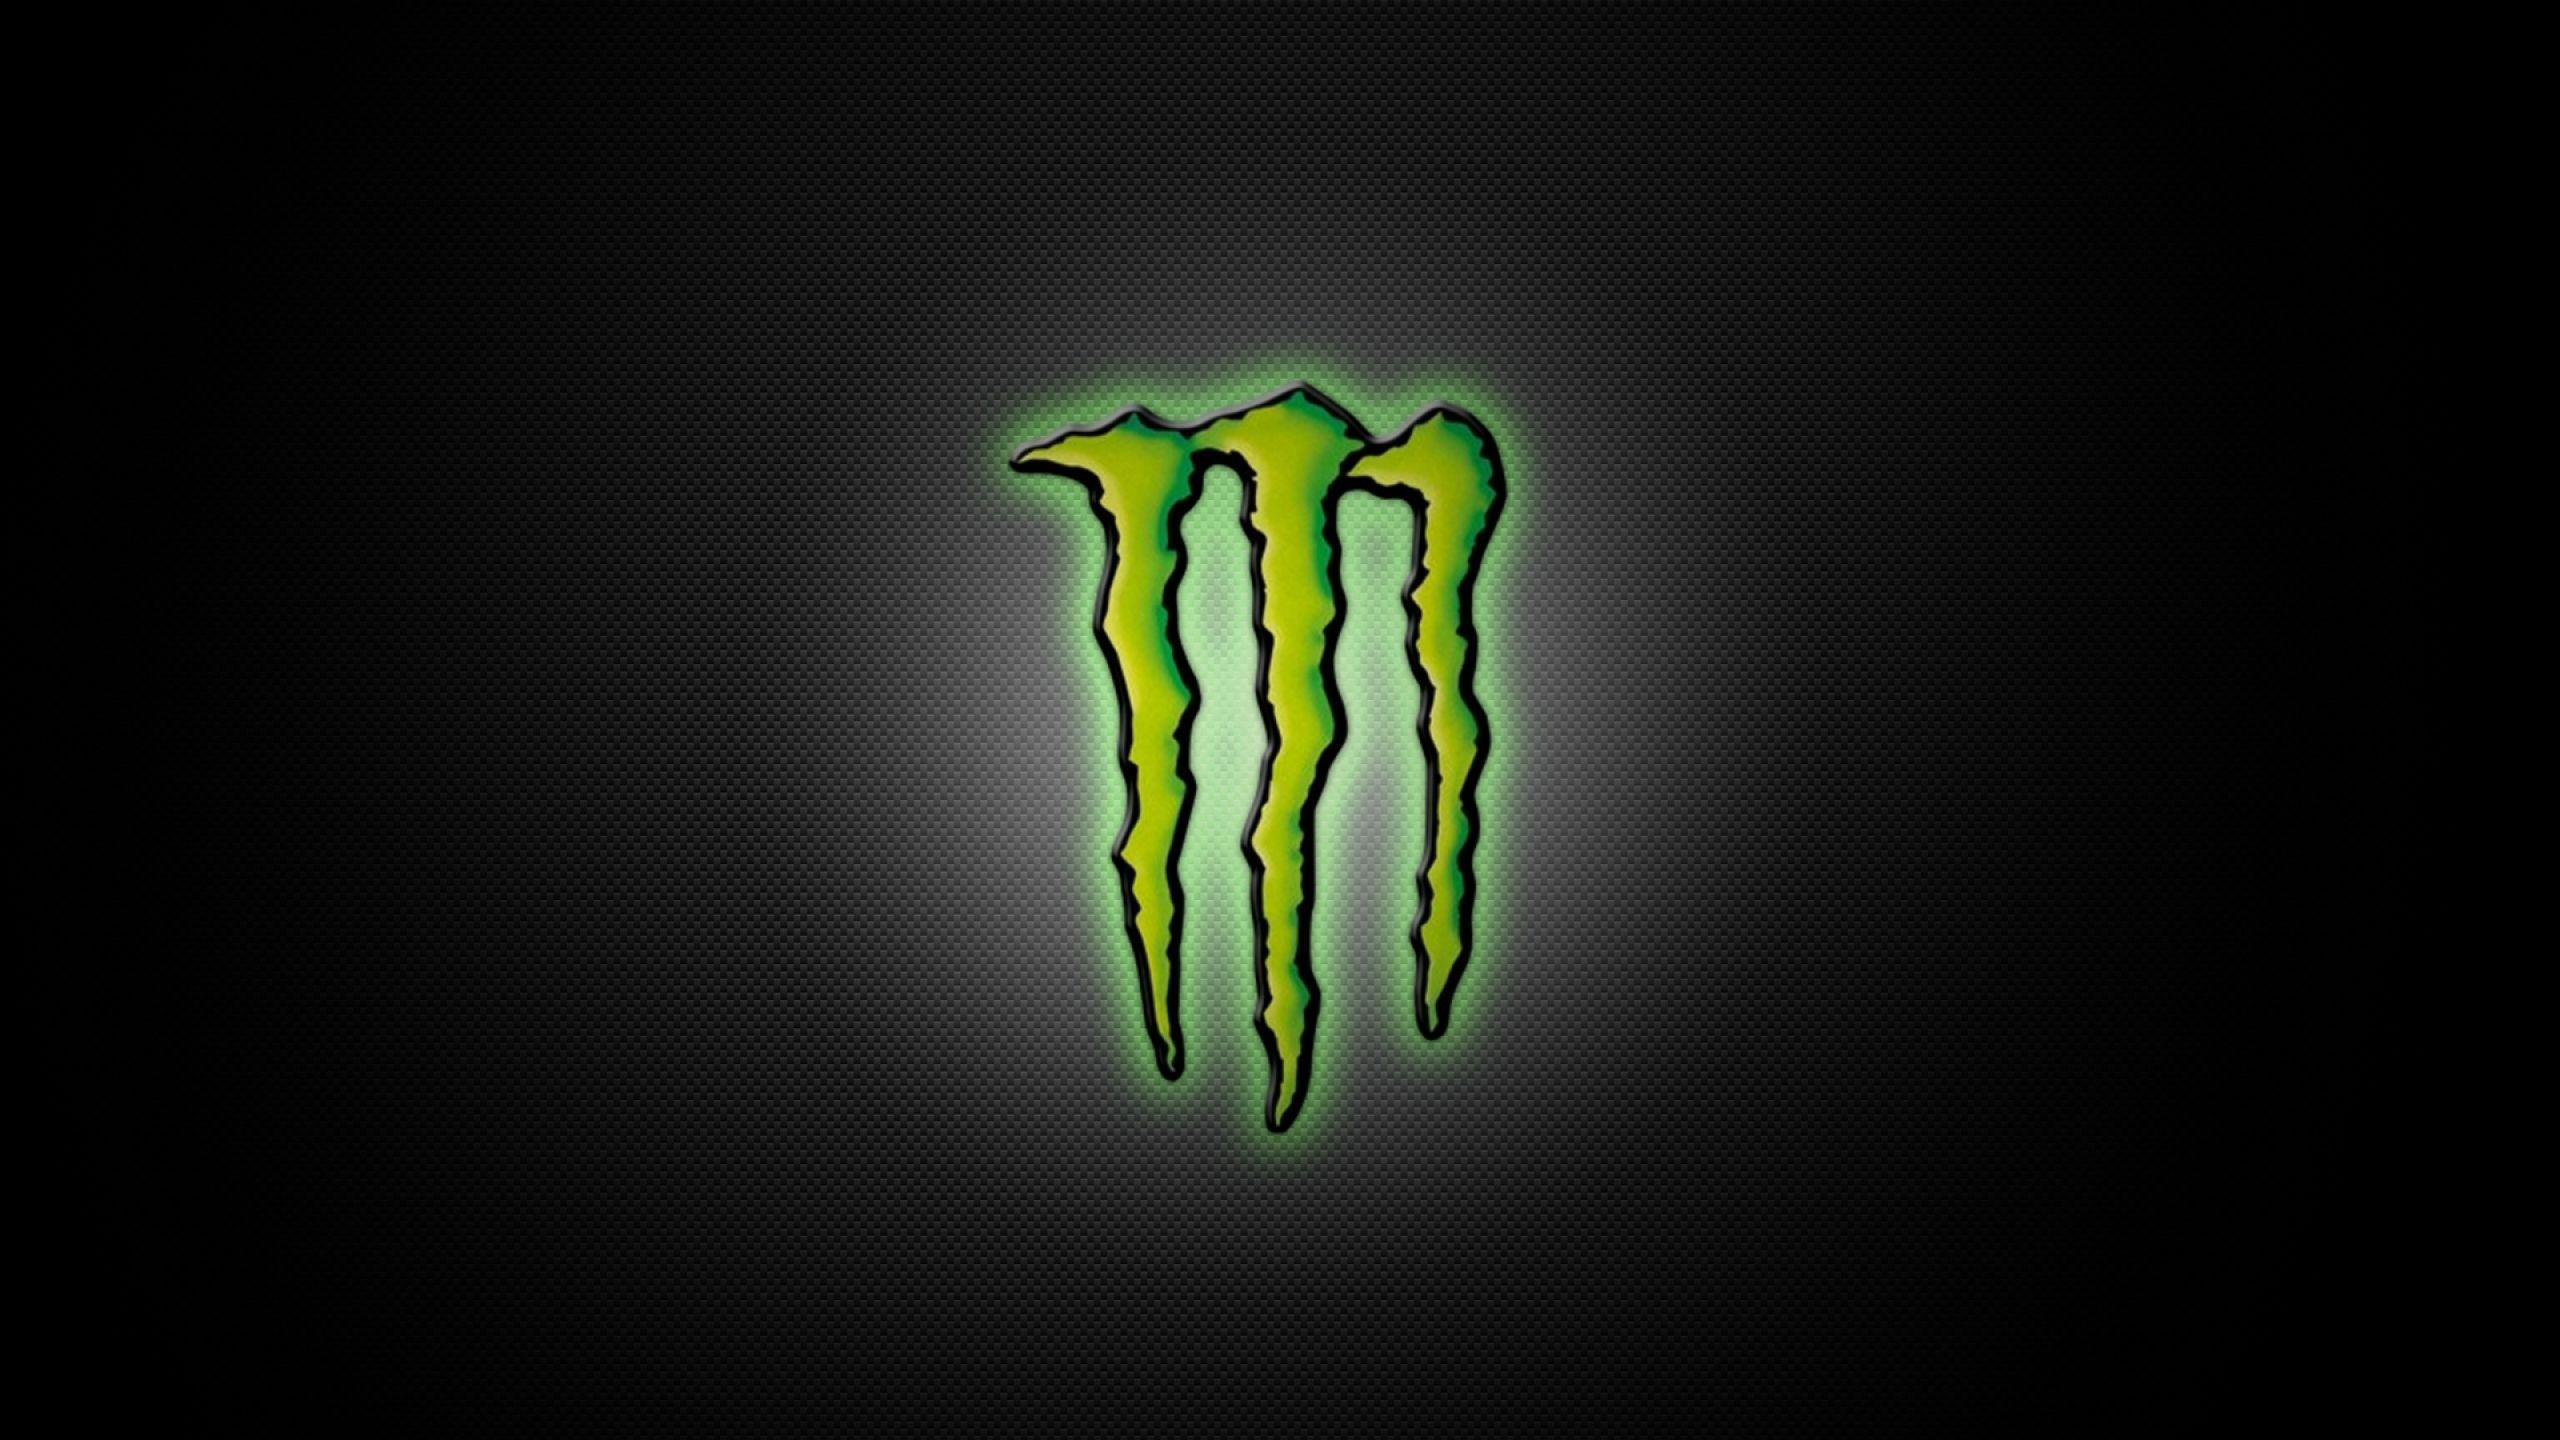 Cool Monster Logo - Monster Energy Wallpapers, Pictures, Images